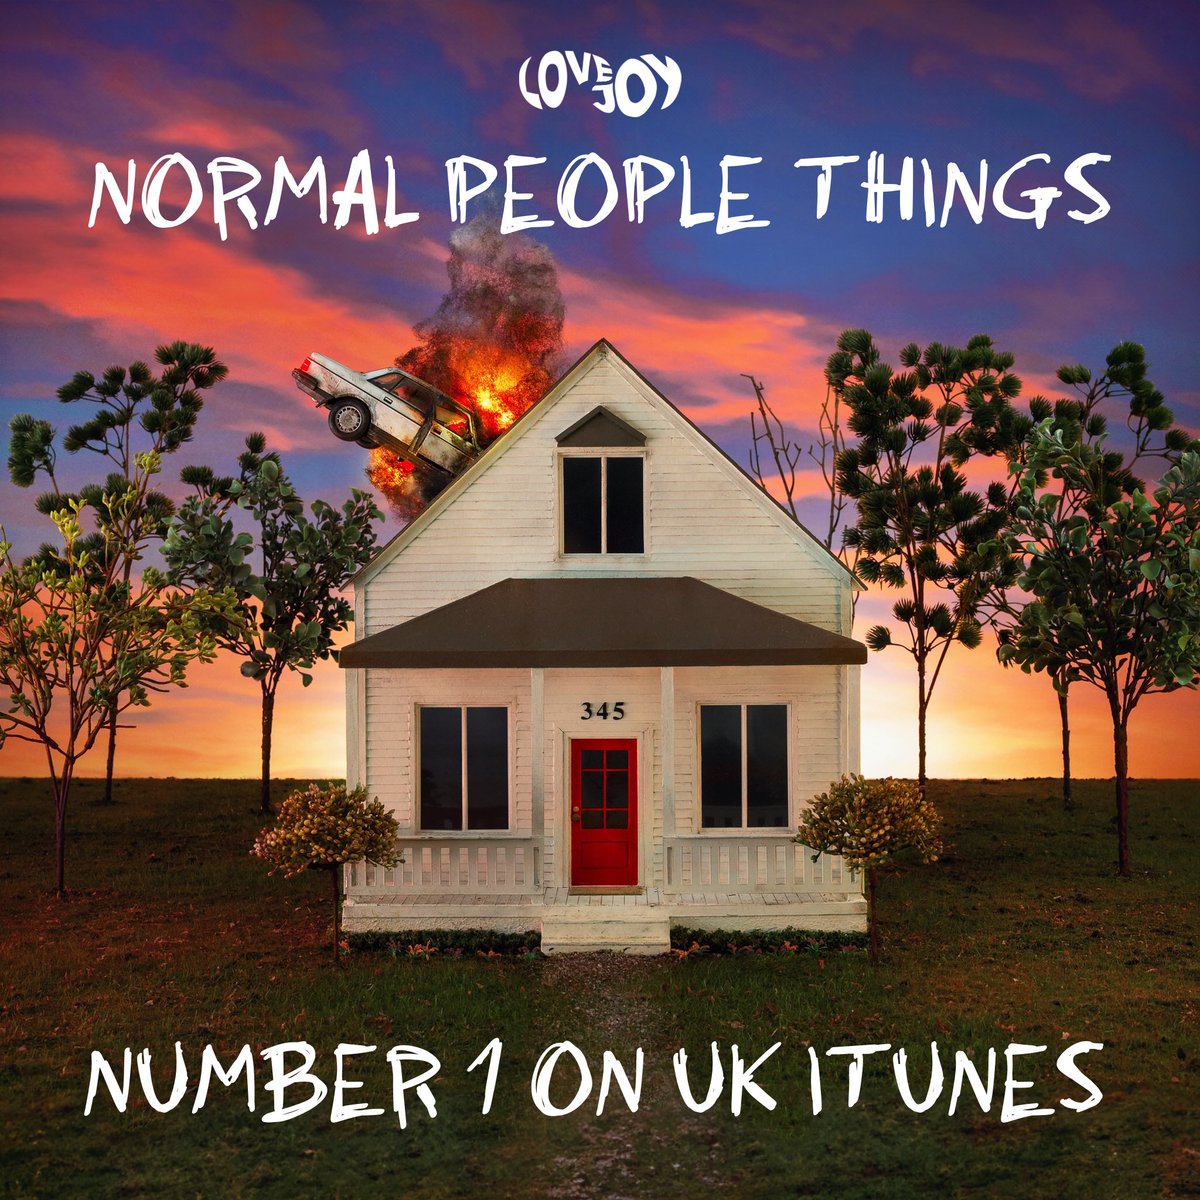 Excuse us, we need to correct an error we made. Normal People Things by @lovejoy is now NUMBER 1 on the iTunes UK charts. #NormalPeopleThings